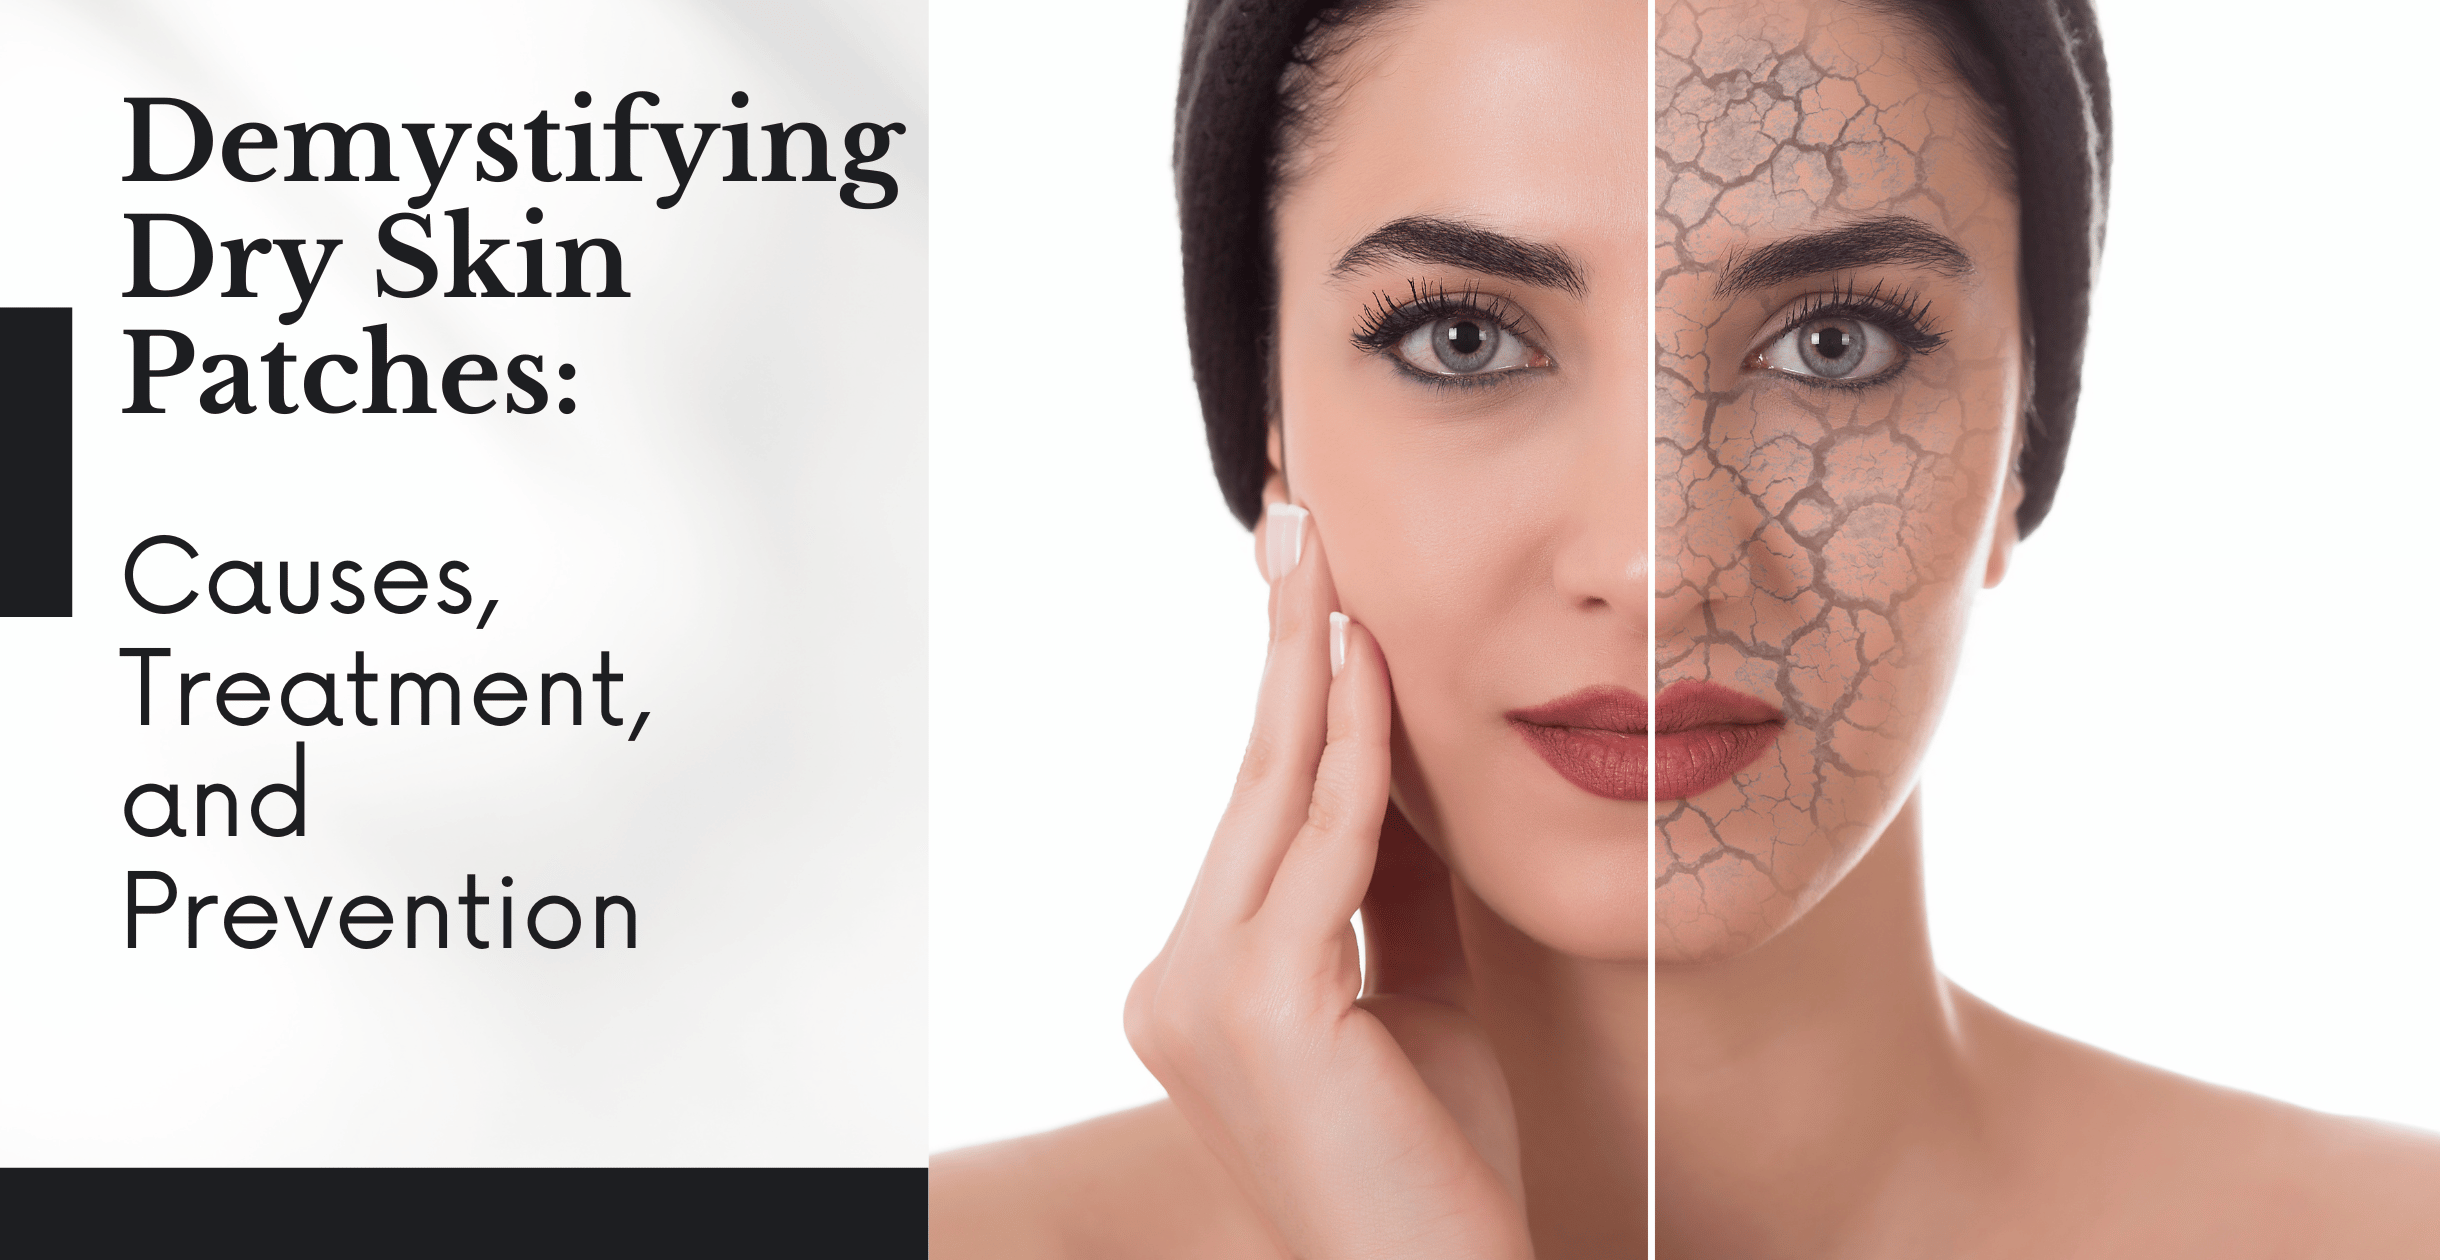 Demystifying Dry Skin Patches: Causes, Treatment, and Prevention